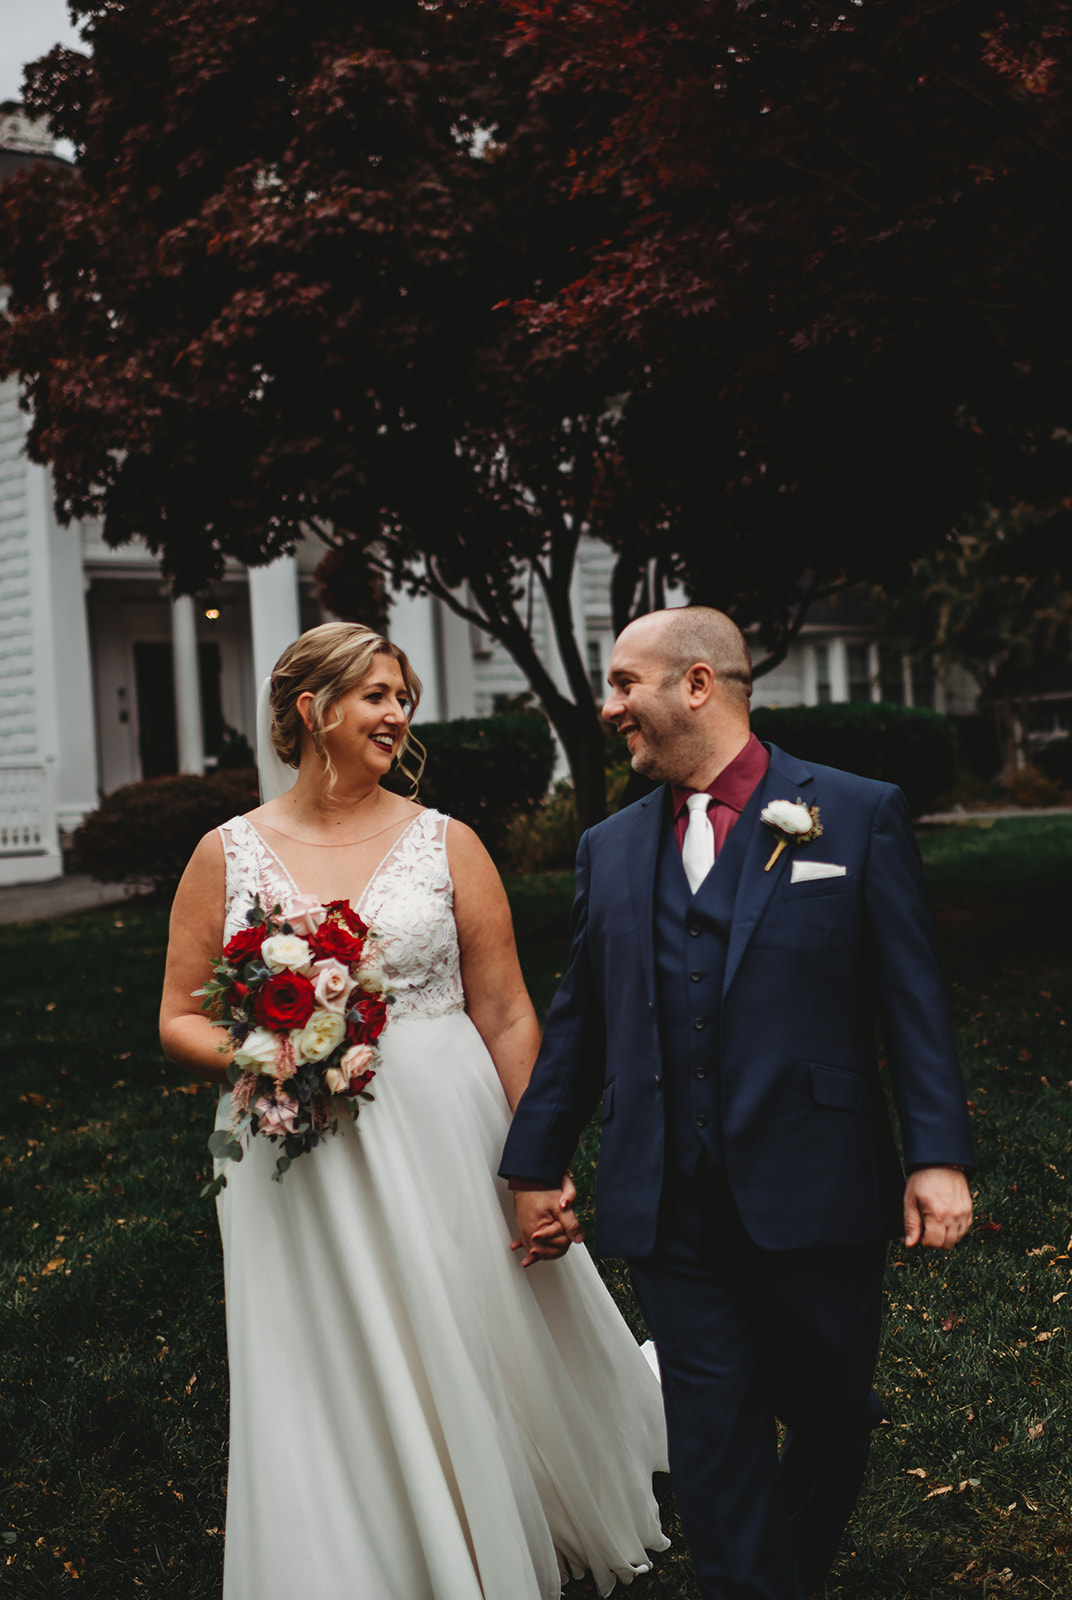 Baltimore wedding photographers captures bridal portraits of husband and wife holding hands and walking on the lawn of Overhills mansion for their wedding day